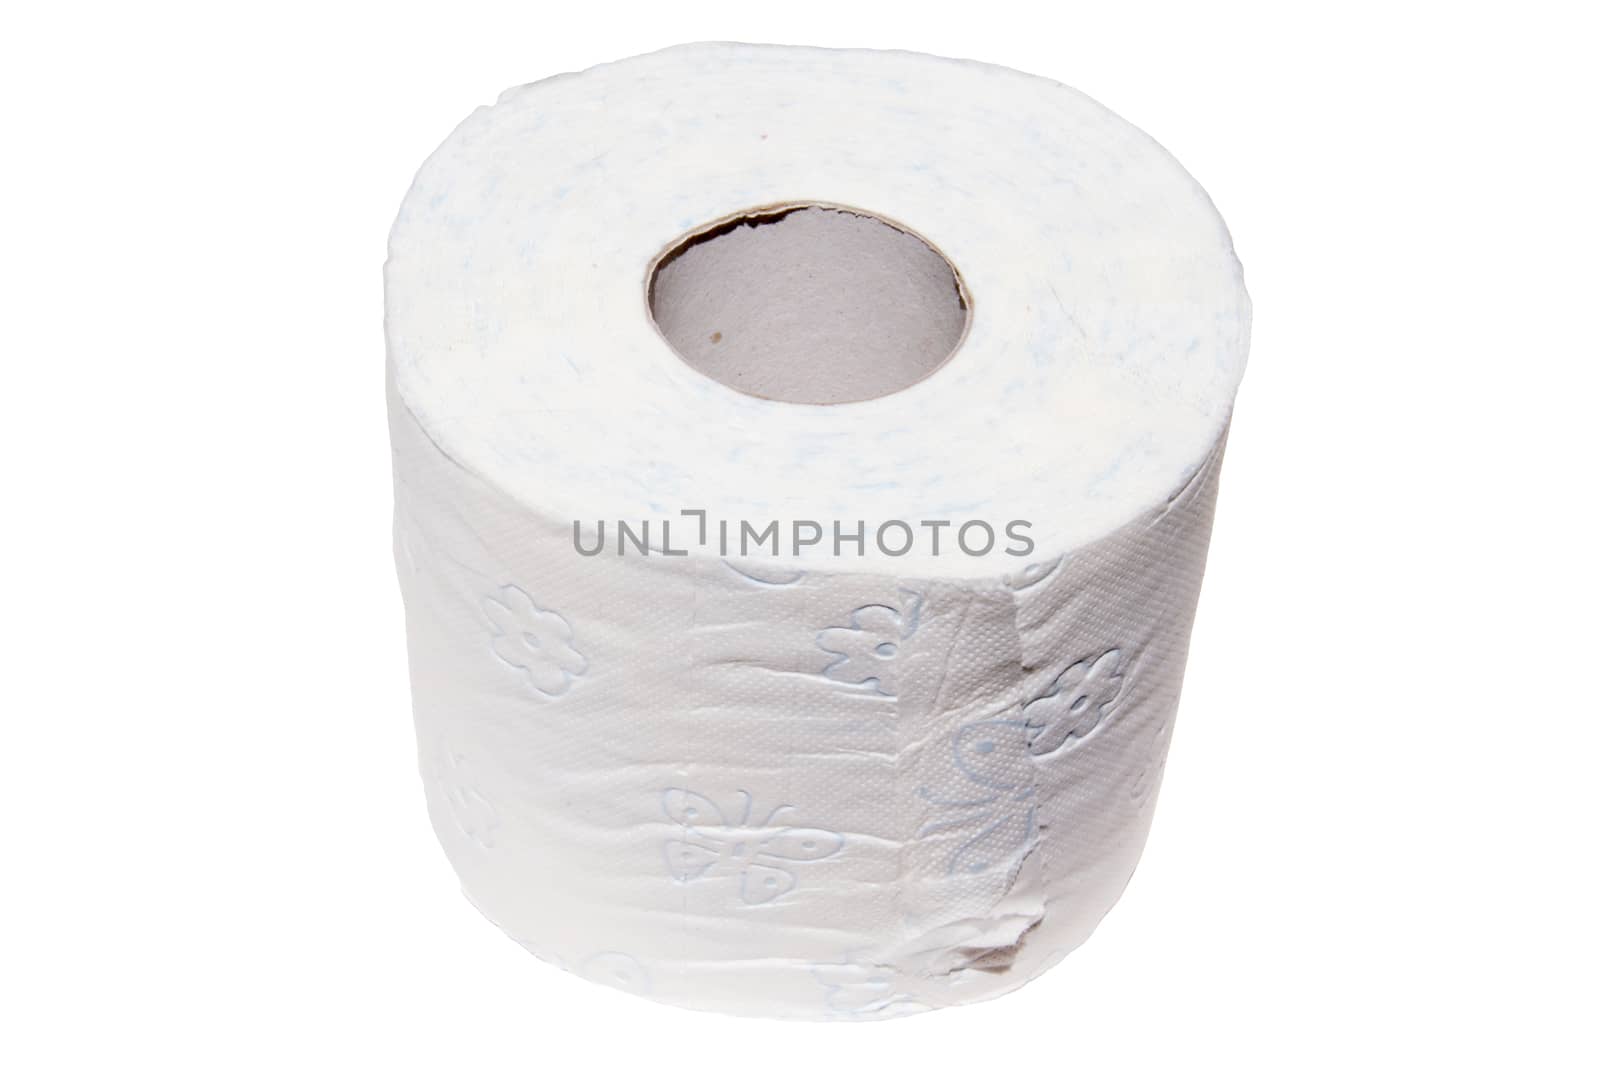 Hygiene toilet paper isolated on white. Bathroom tissue on white background. coronavirus, quarantine supply. Domestic soft roll. Sanitary everyday household sheet. simple restroom product close up .